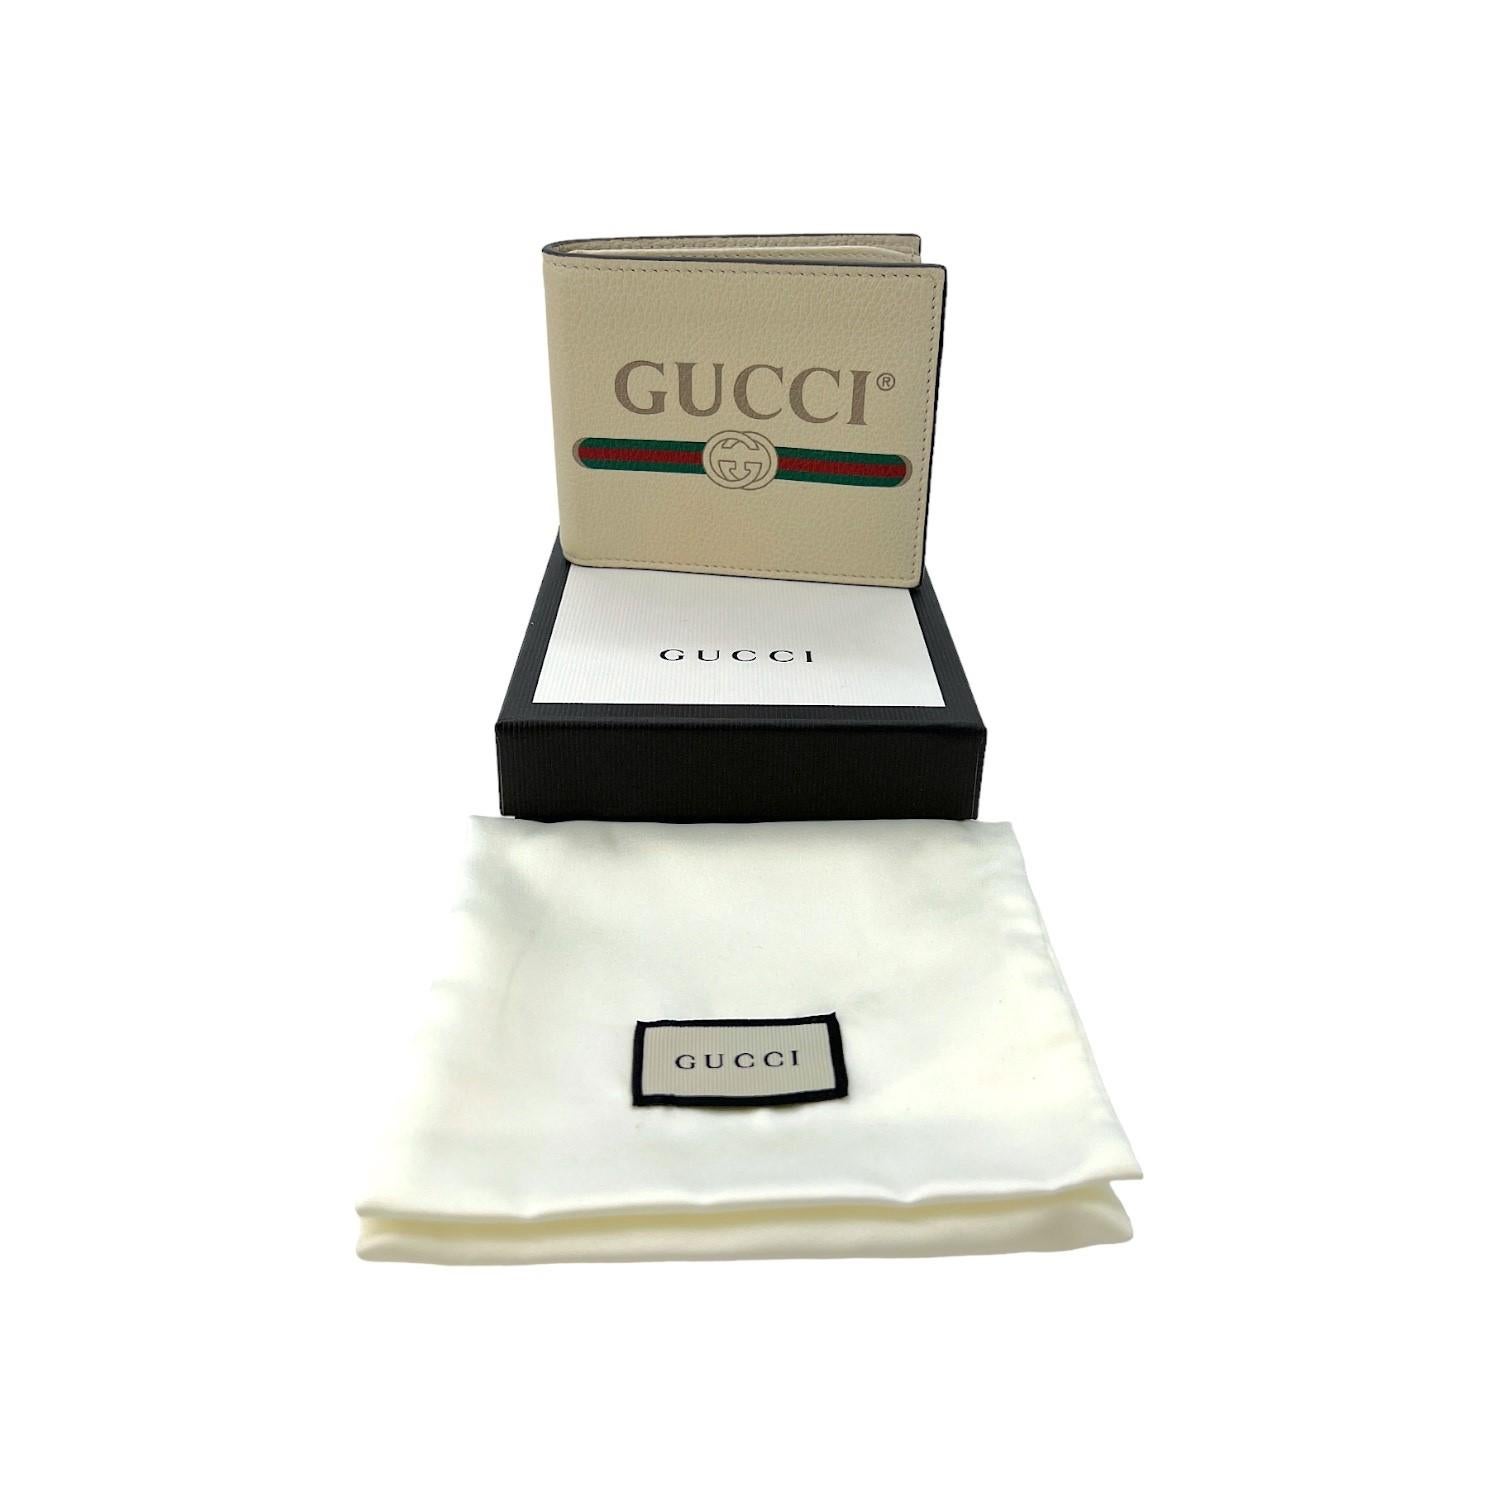 This Gucci Graphic Print Bifold Wallet was made in Italy and it is crafted of cream-colored pebbled leather and it features a Gucci graphic print logo on the front. The bifold wallet opens up to 8 card slots with 2 coin pockets and 2 bill